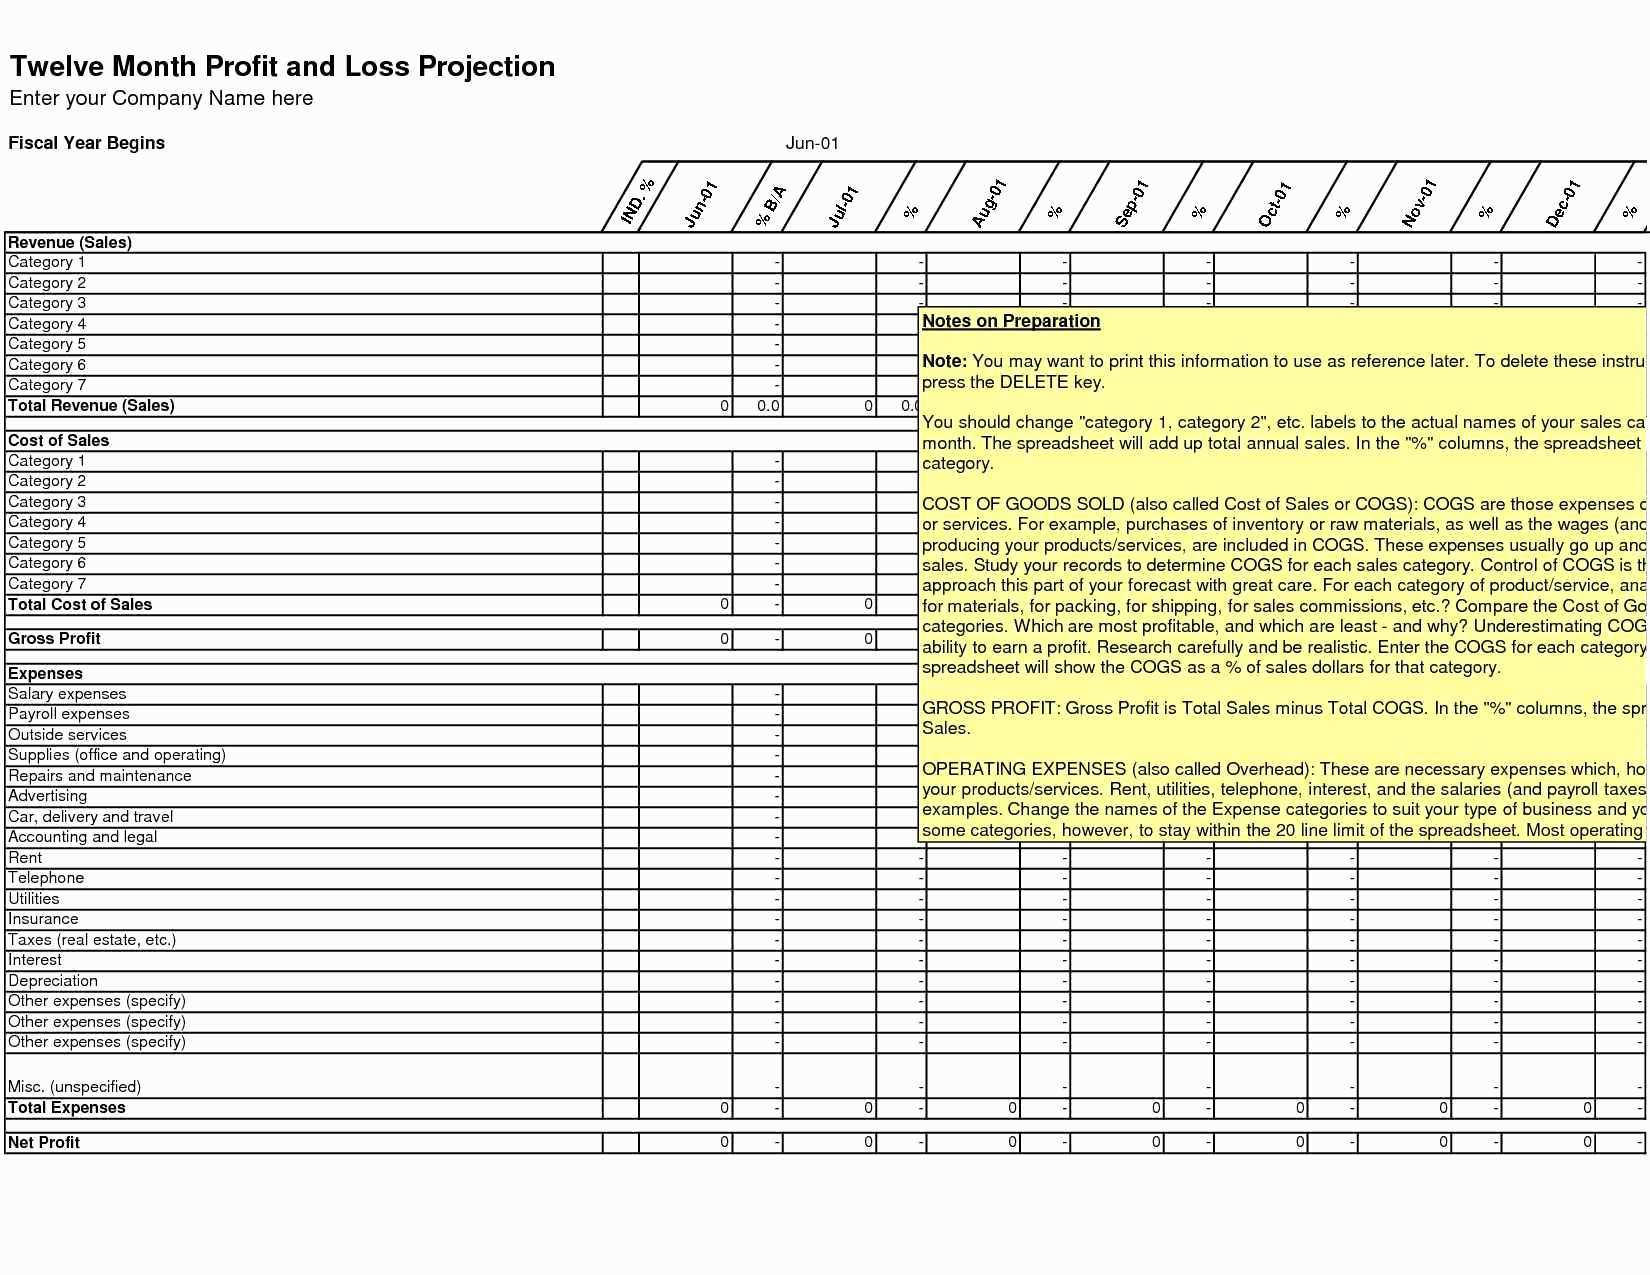 Tax Deduction Spreadsheet Template Excel With Regard To Tax Deduction Spreadsheet Template Excel  Spreadsheet Collections